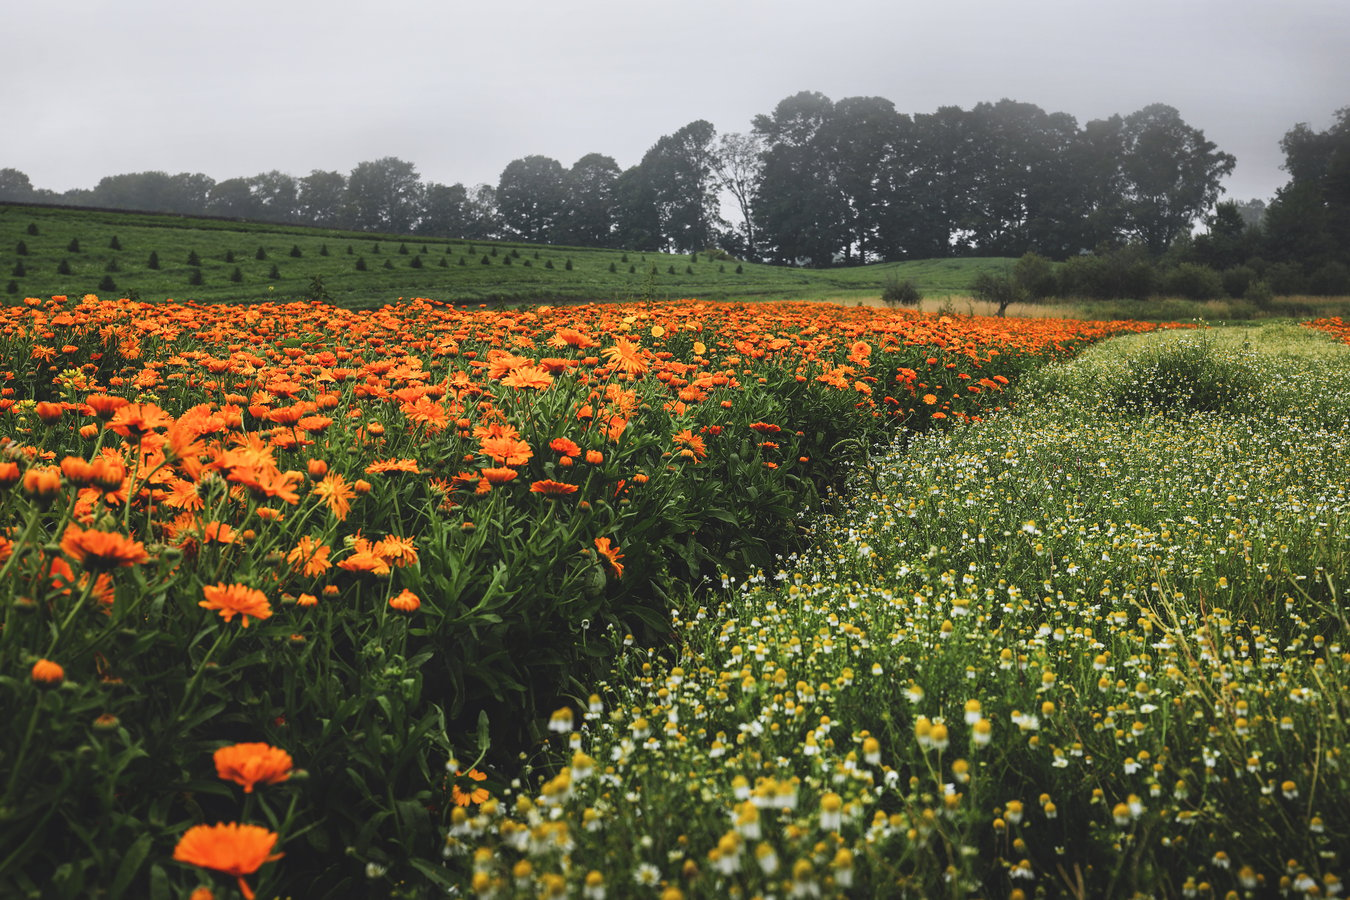 Cultivated calendula and chamomile side by side in a field